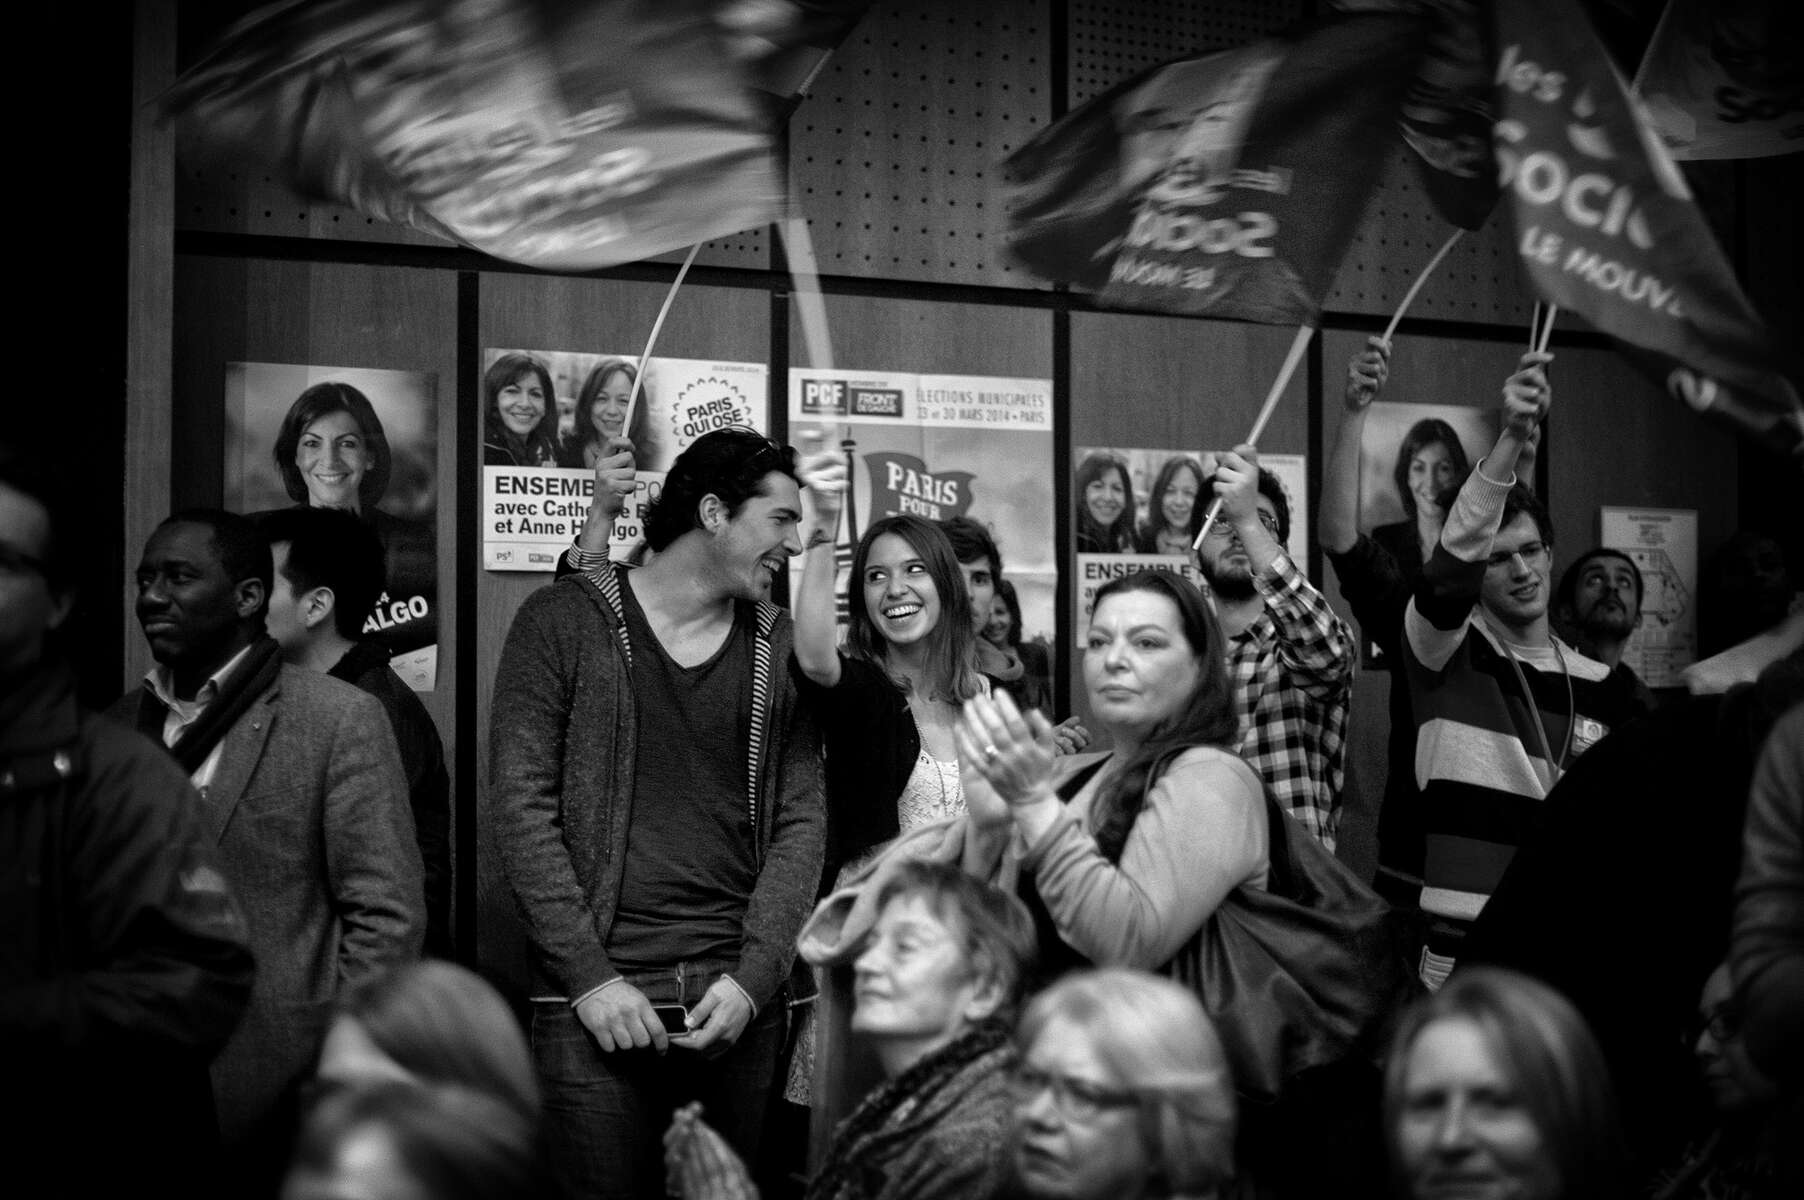 March 11, 2014.  PARIS, FRANCE- Supporters cheer and wave flags as mayoral candidate Anne Hidalgo speaks at a campaign event at Espace Reuilly in Paris' 12th Quarter.  For the first time in France's history, Paris will have a woman as a mayor - either Socialist Anne Hidalgo or Center-Right Nathalie Kosciusko-Morizet.  Photo by Scout Tufankjian